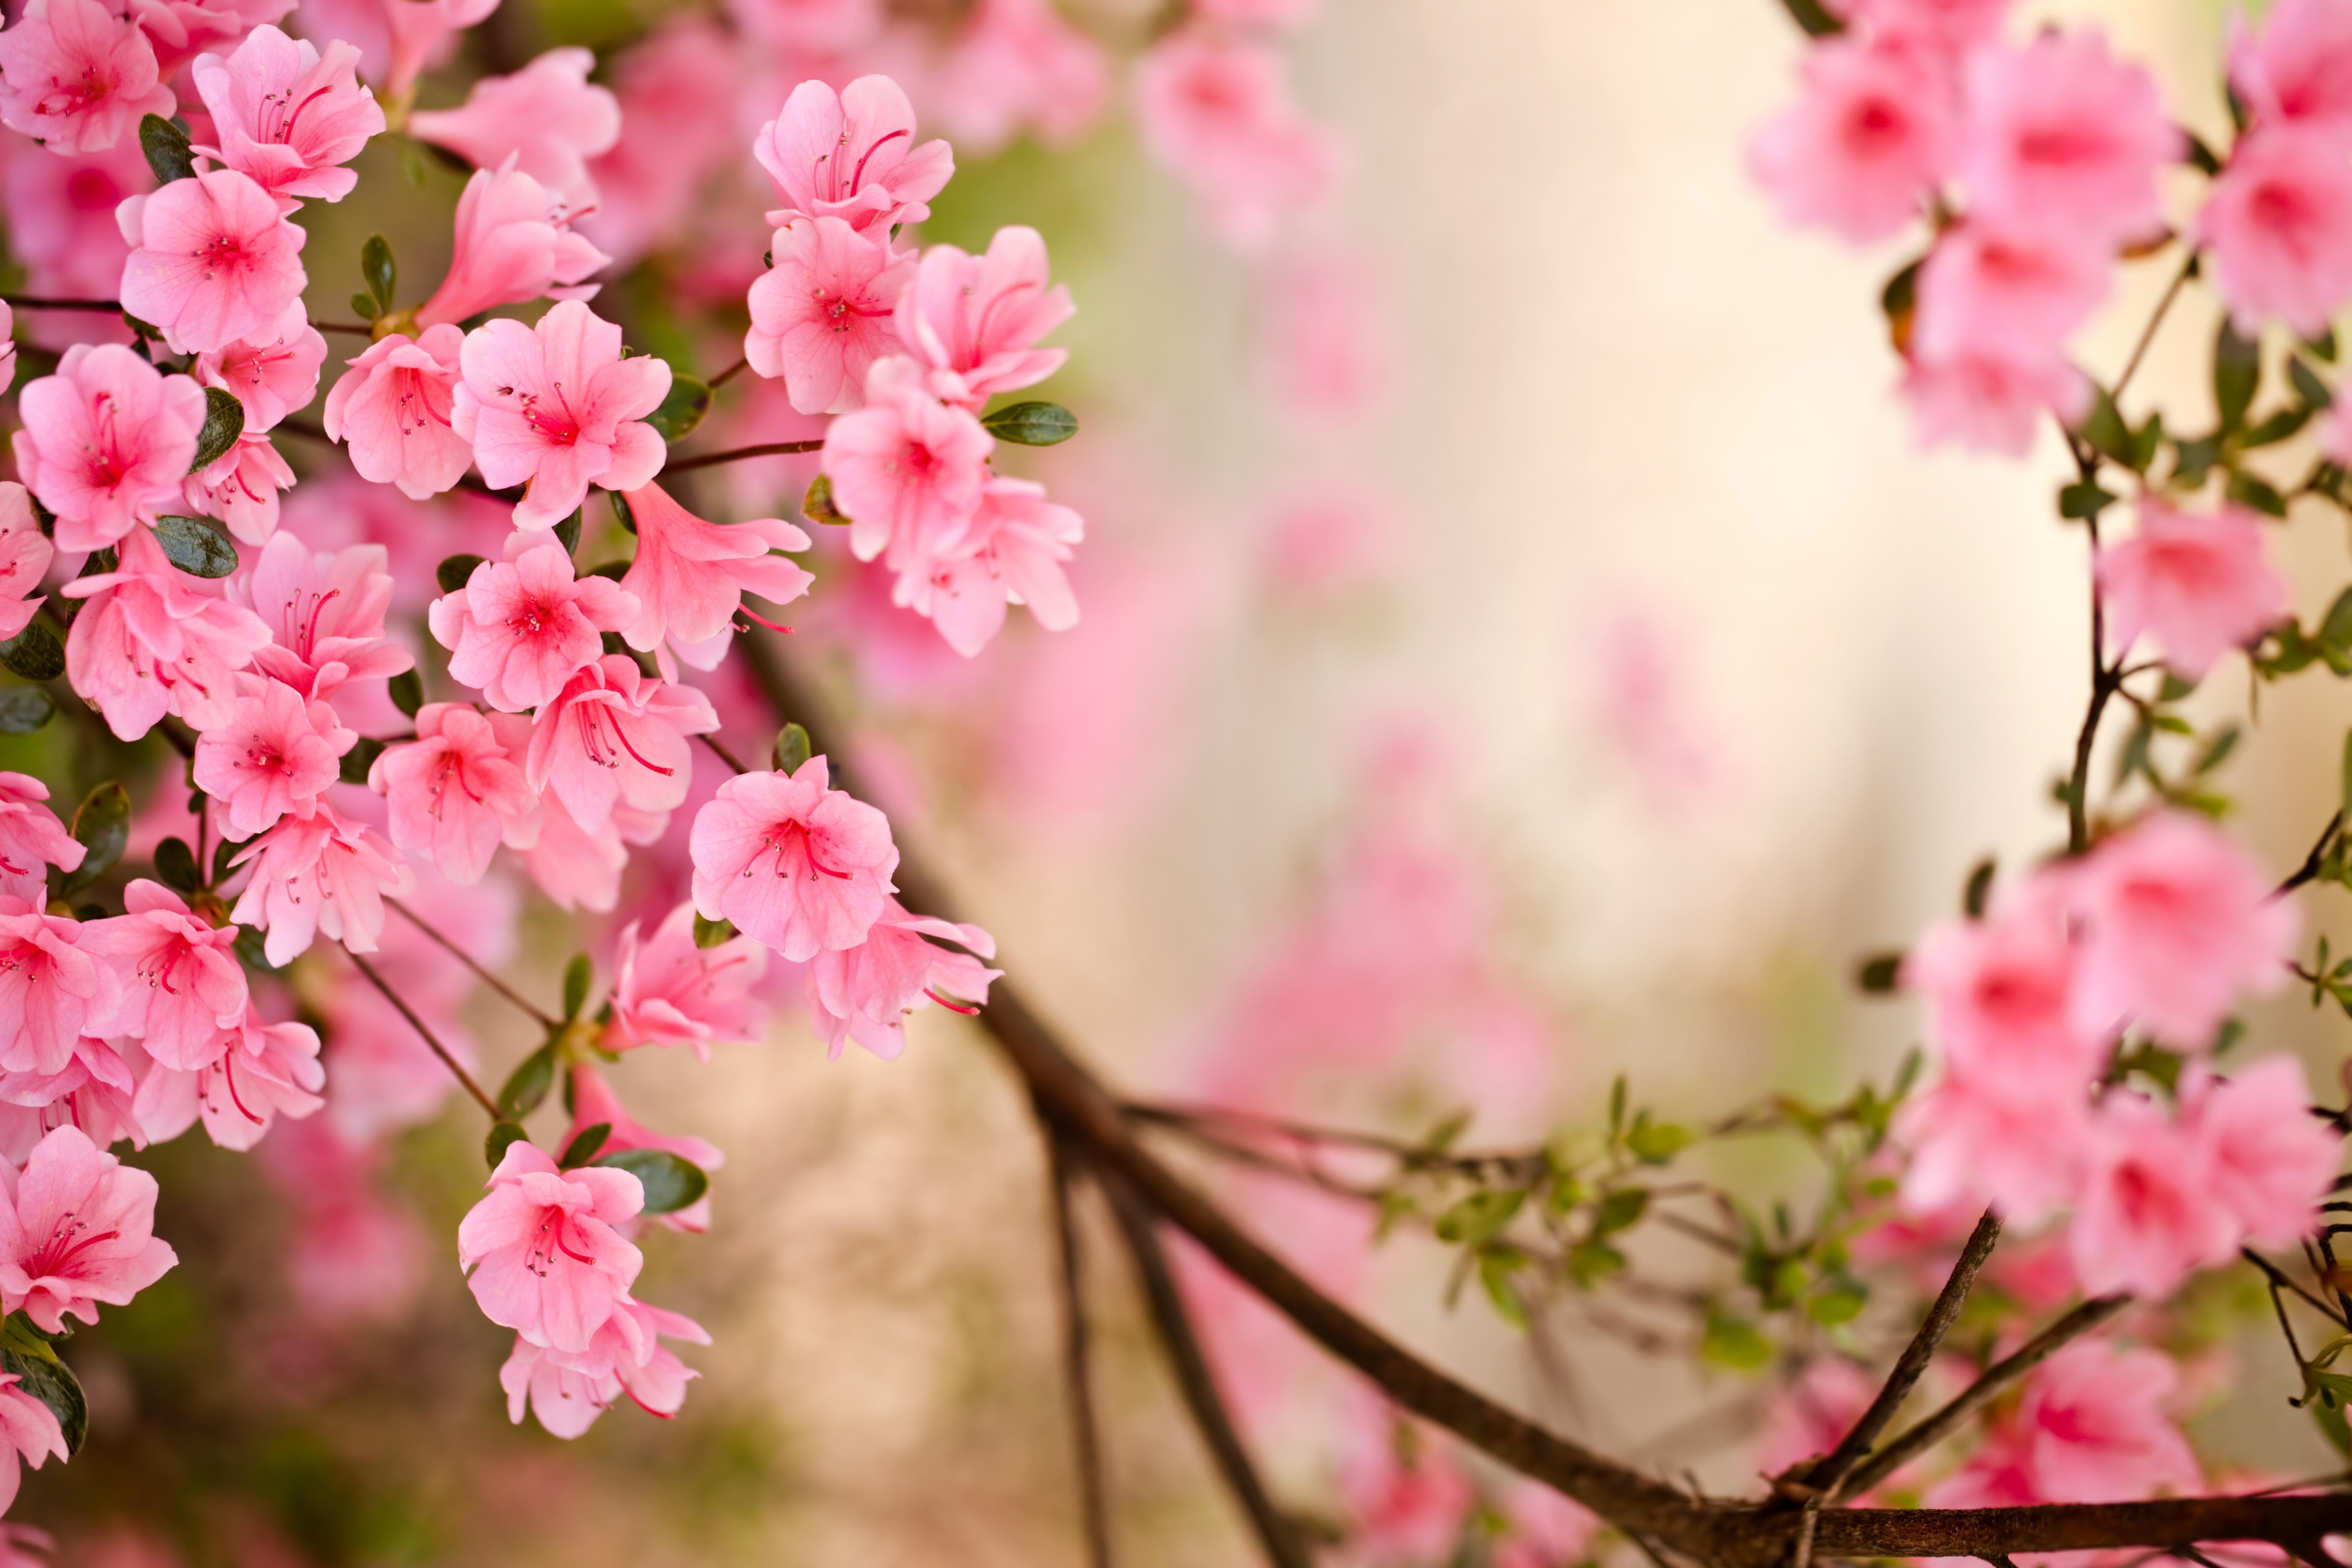 High Quality Wallpaper And Image Of Spring For Desktop Background